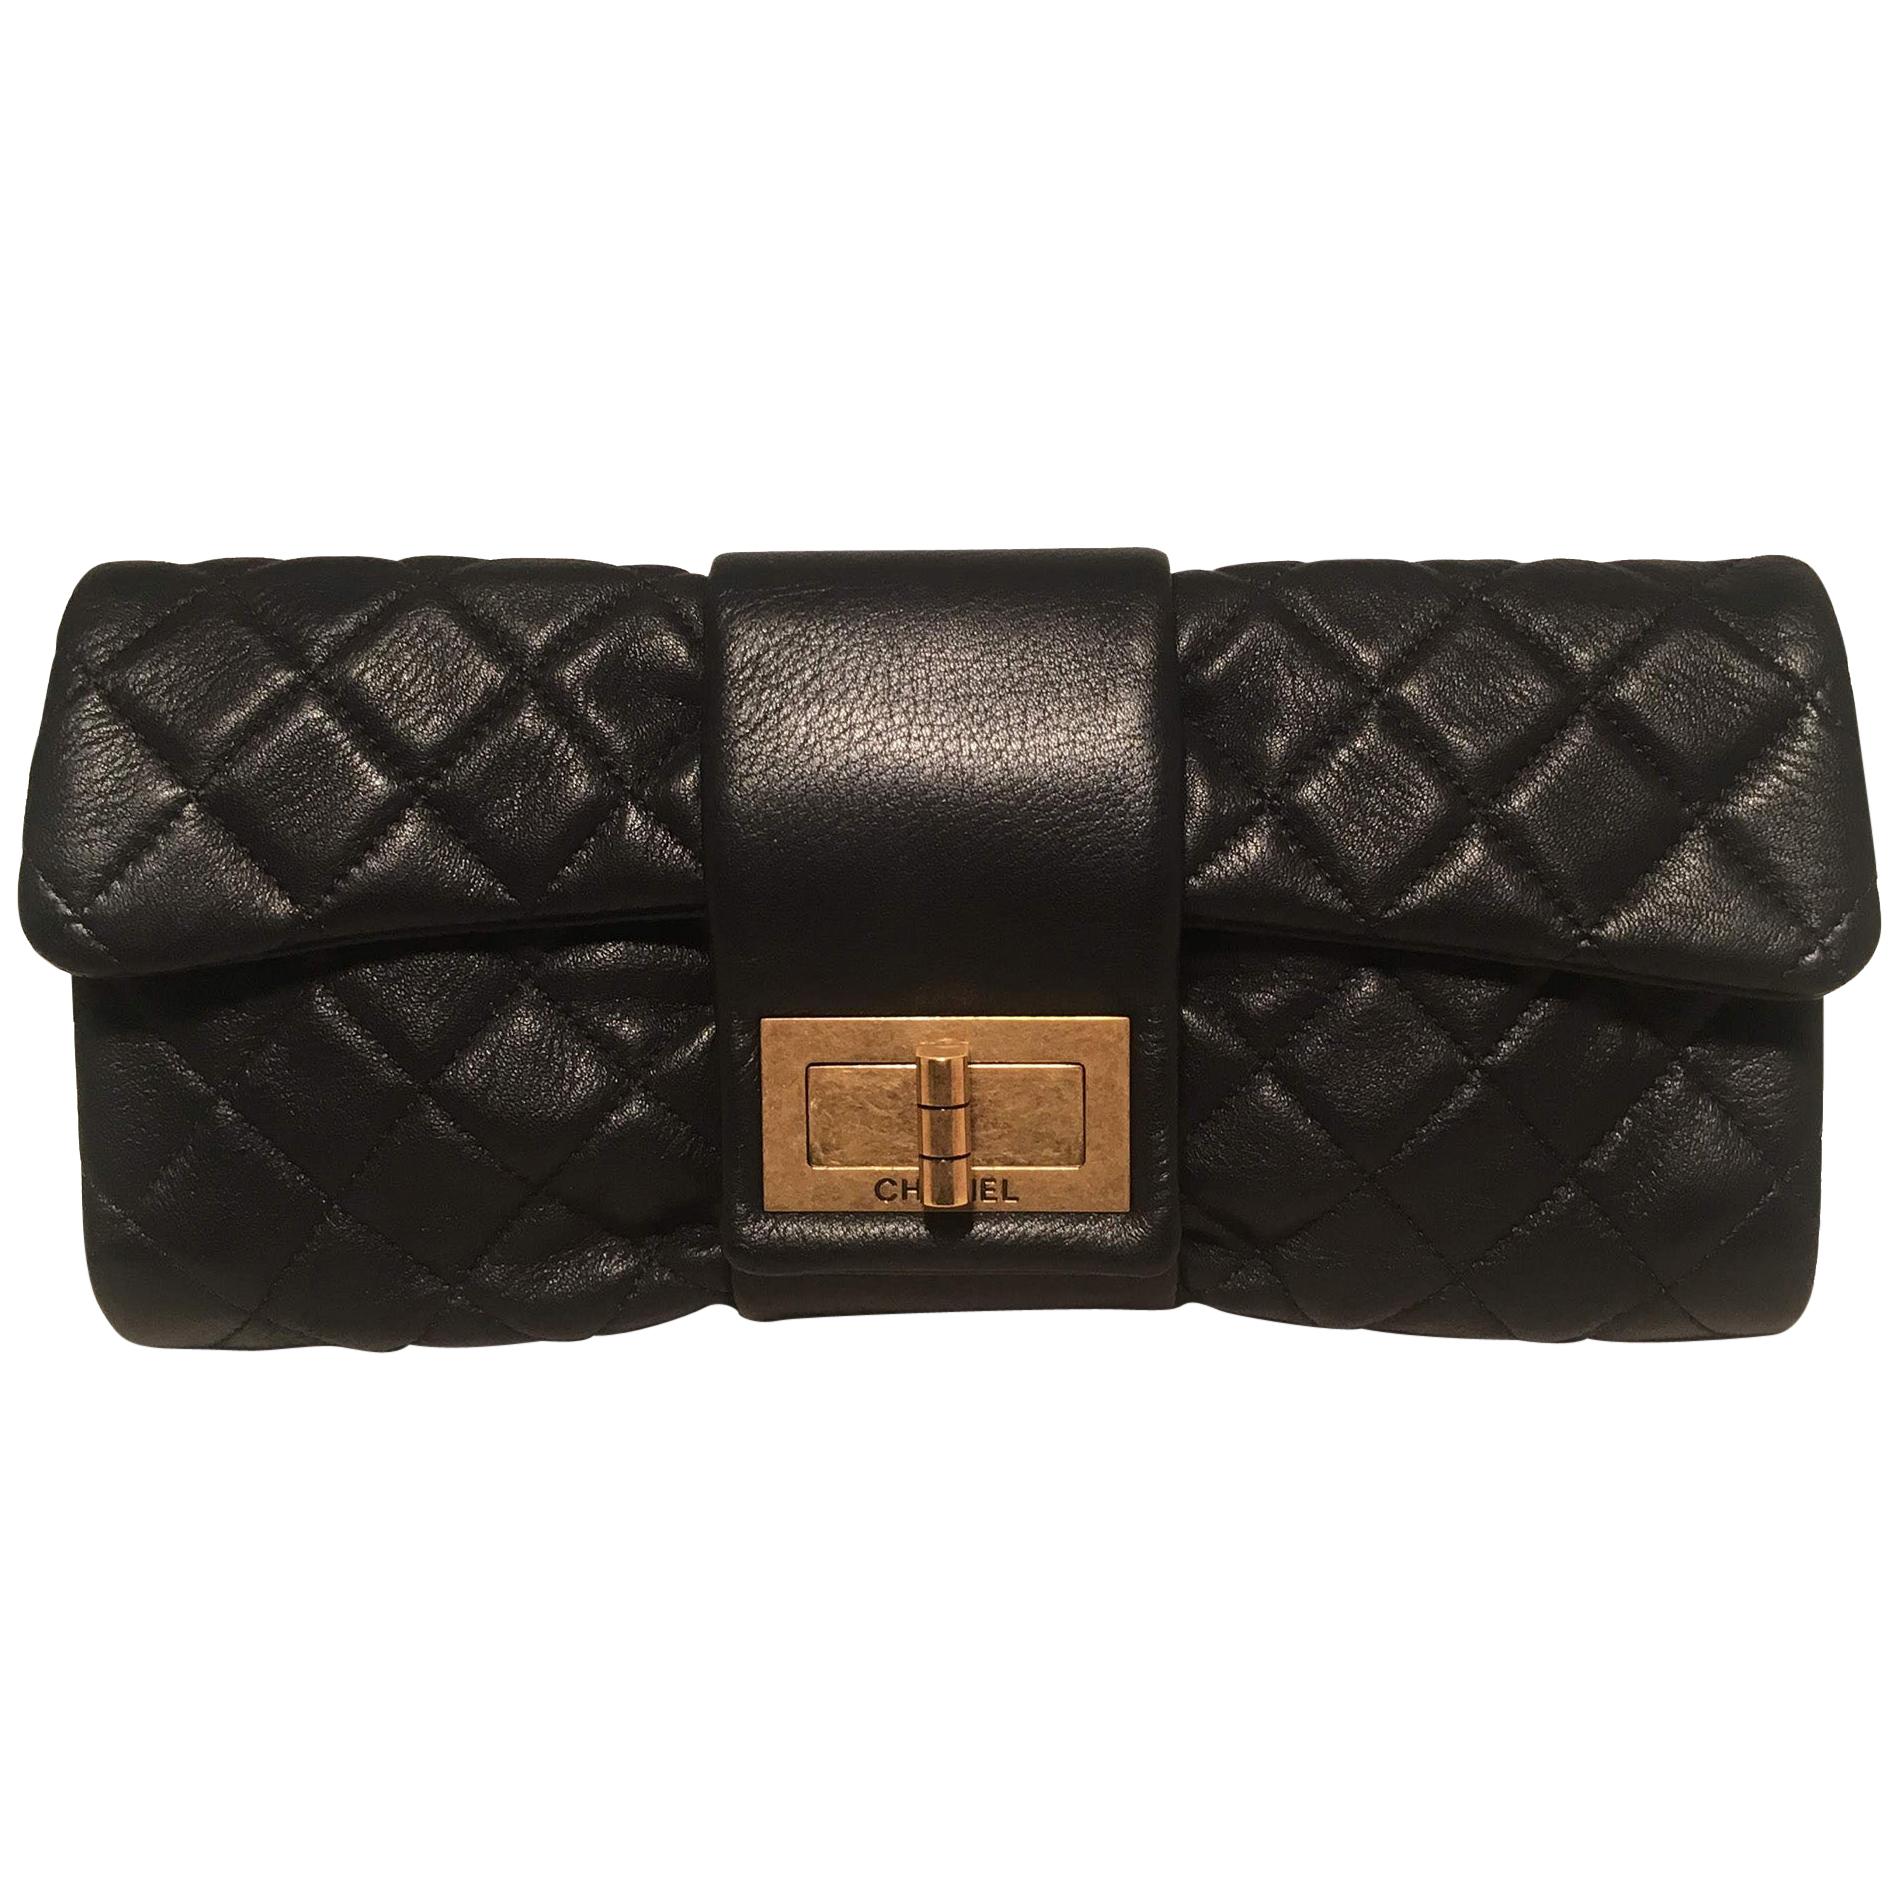 Chanel Black Quilted Sheepskin Leather 2.55 Reissue Mademoiselle Clutch